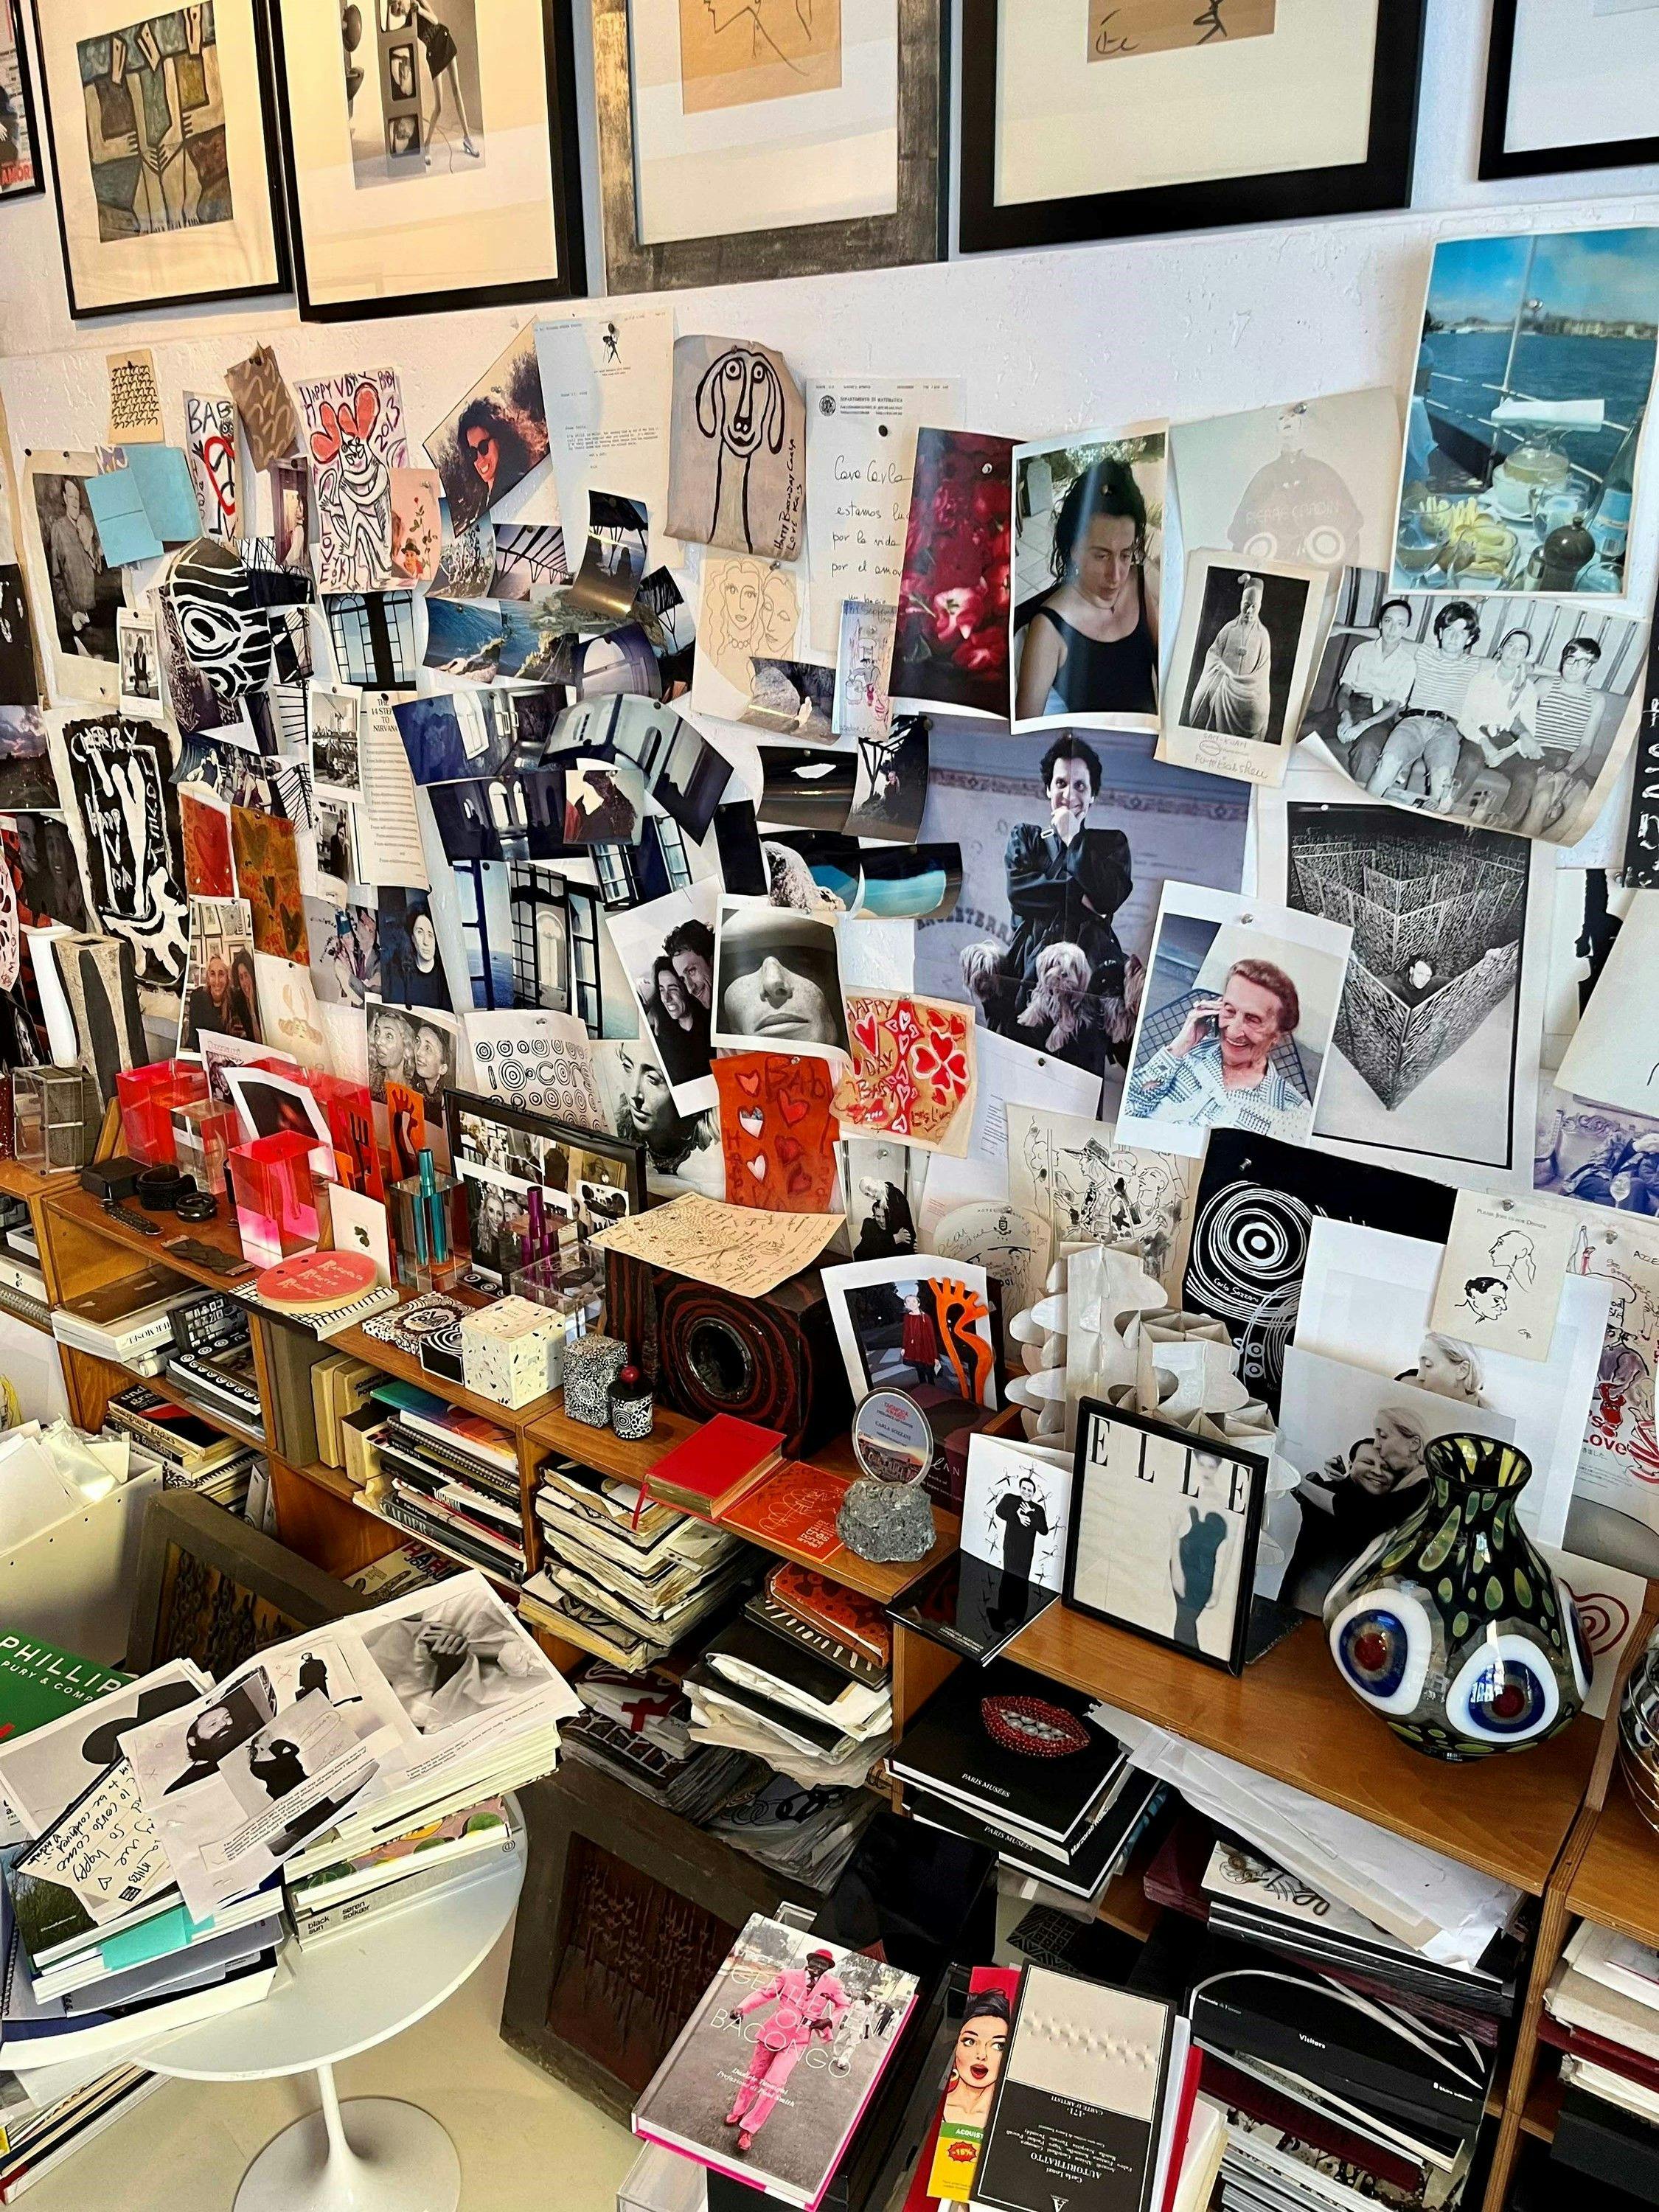 Carla Sozzani on Her Print Collection: “Paper Is an Addiction”